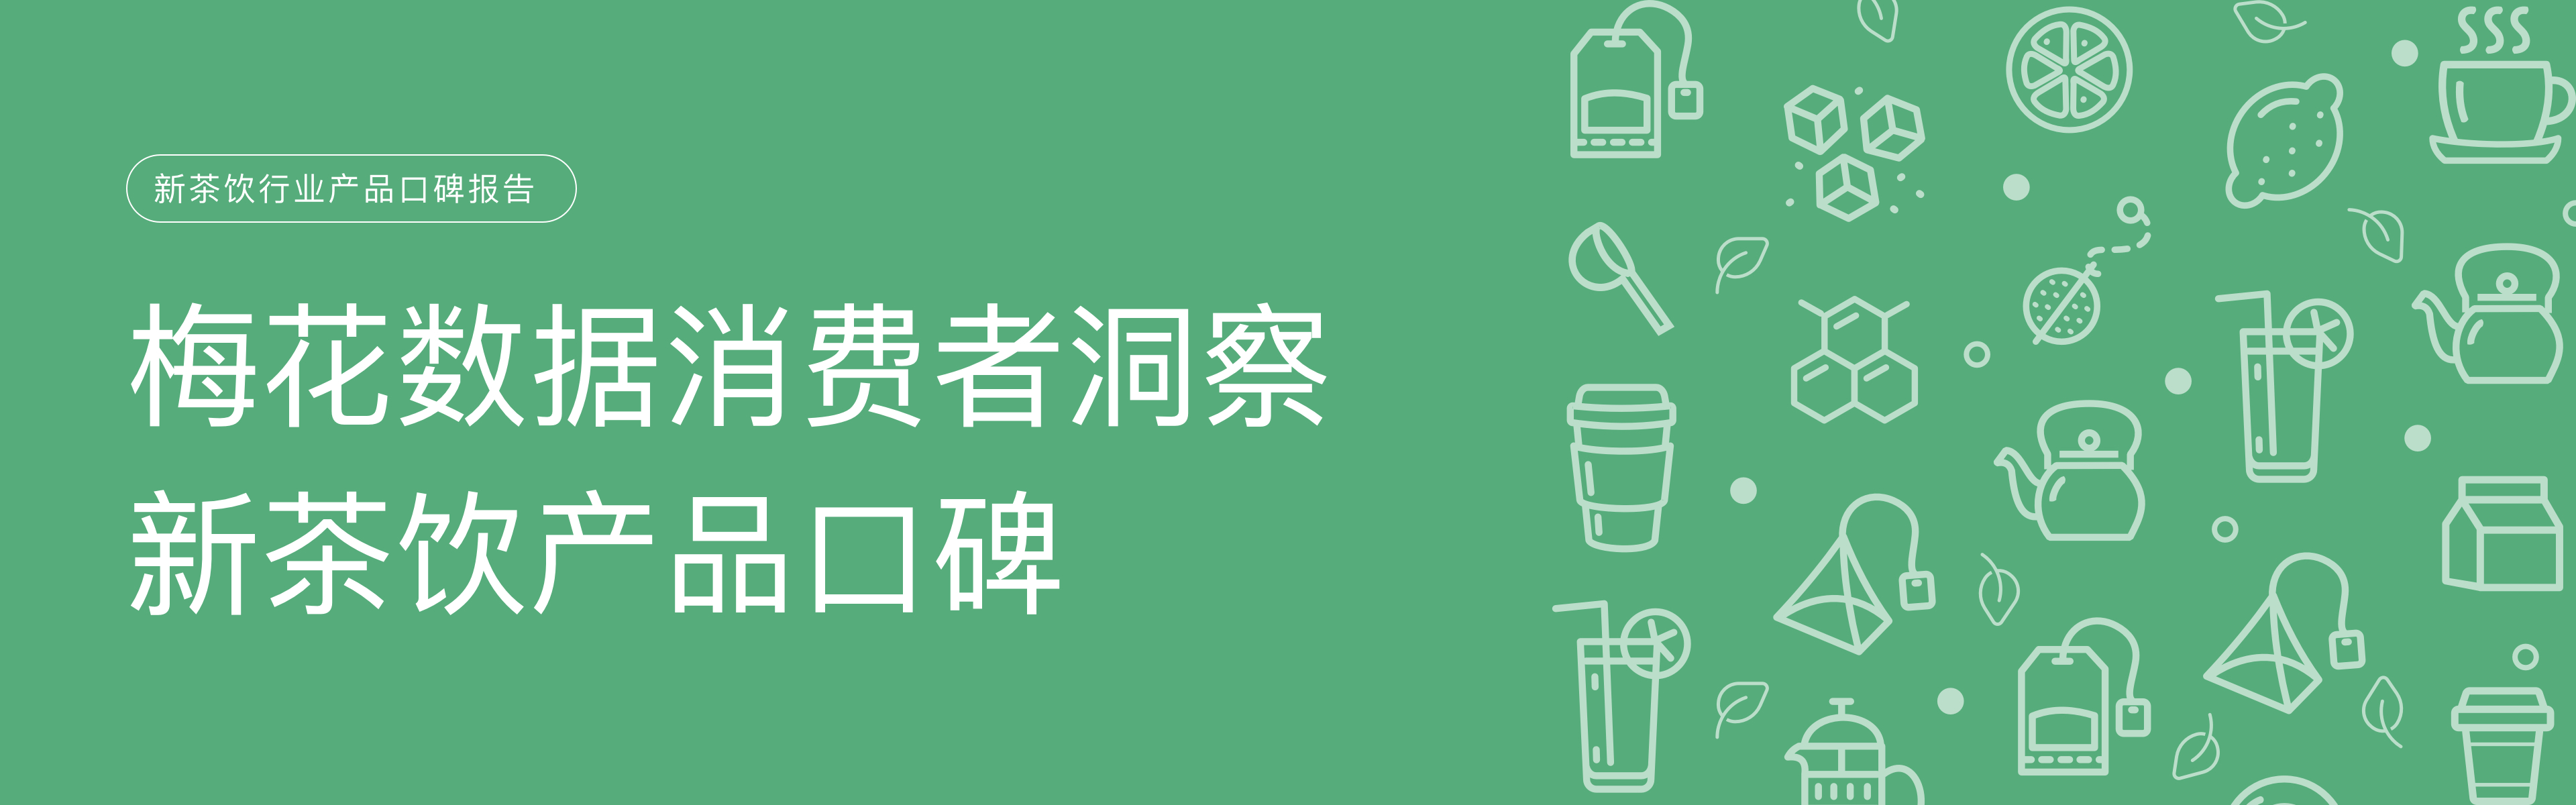 mohodata官网首页轮播banner3